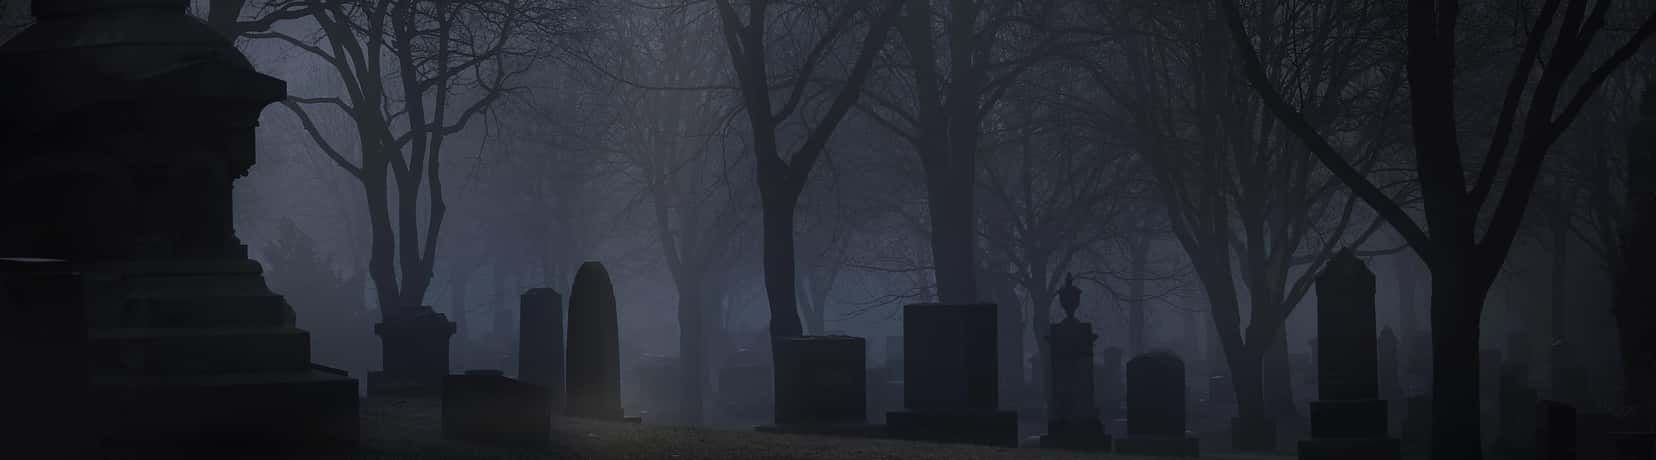 One of the haunted cemeteries we visit on our Group Ghost Tours